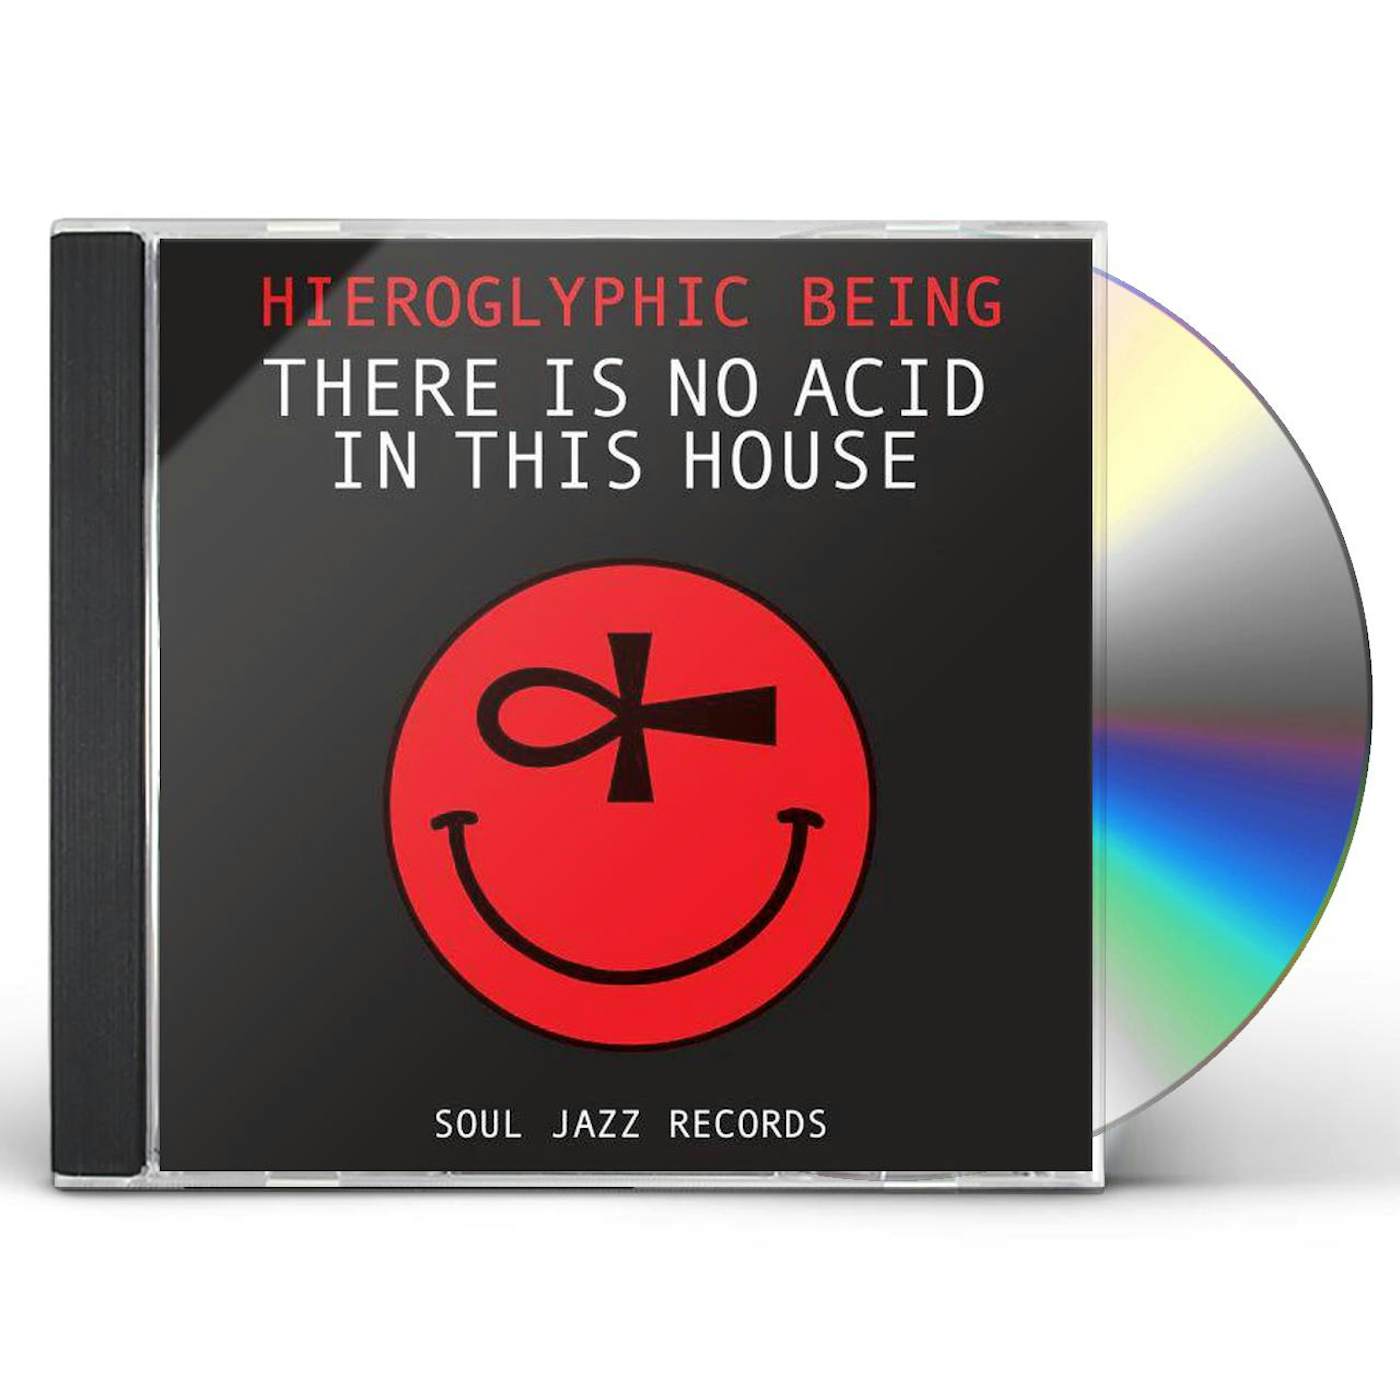 Hieroglyphic Being There Is No Acid In This House CD